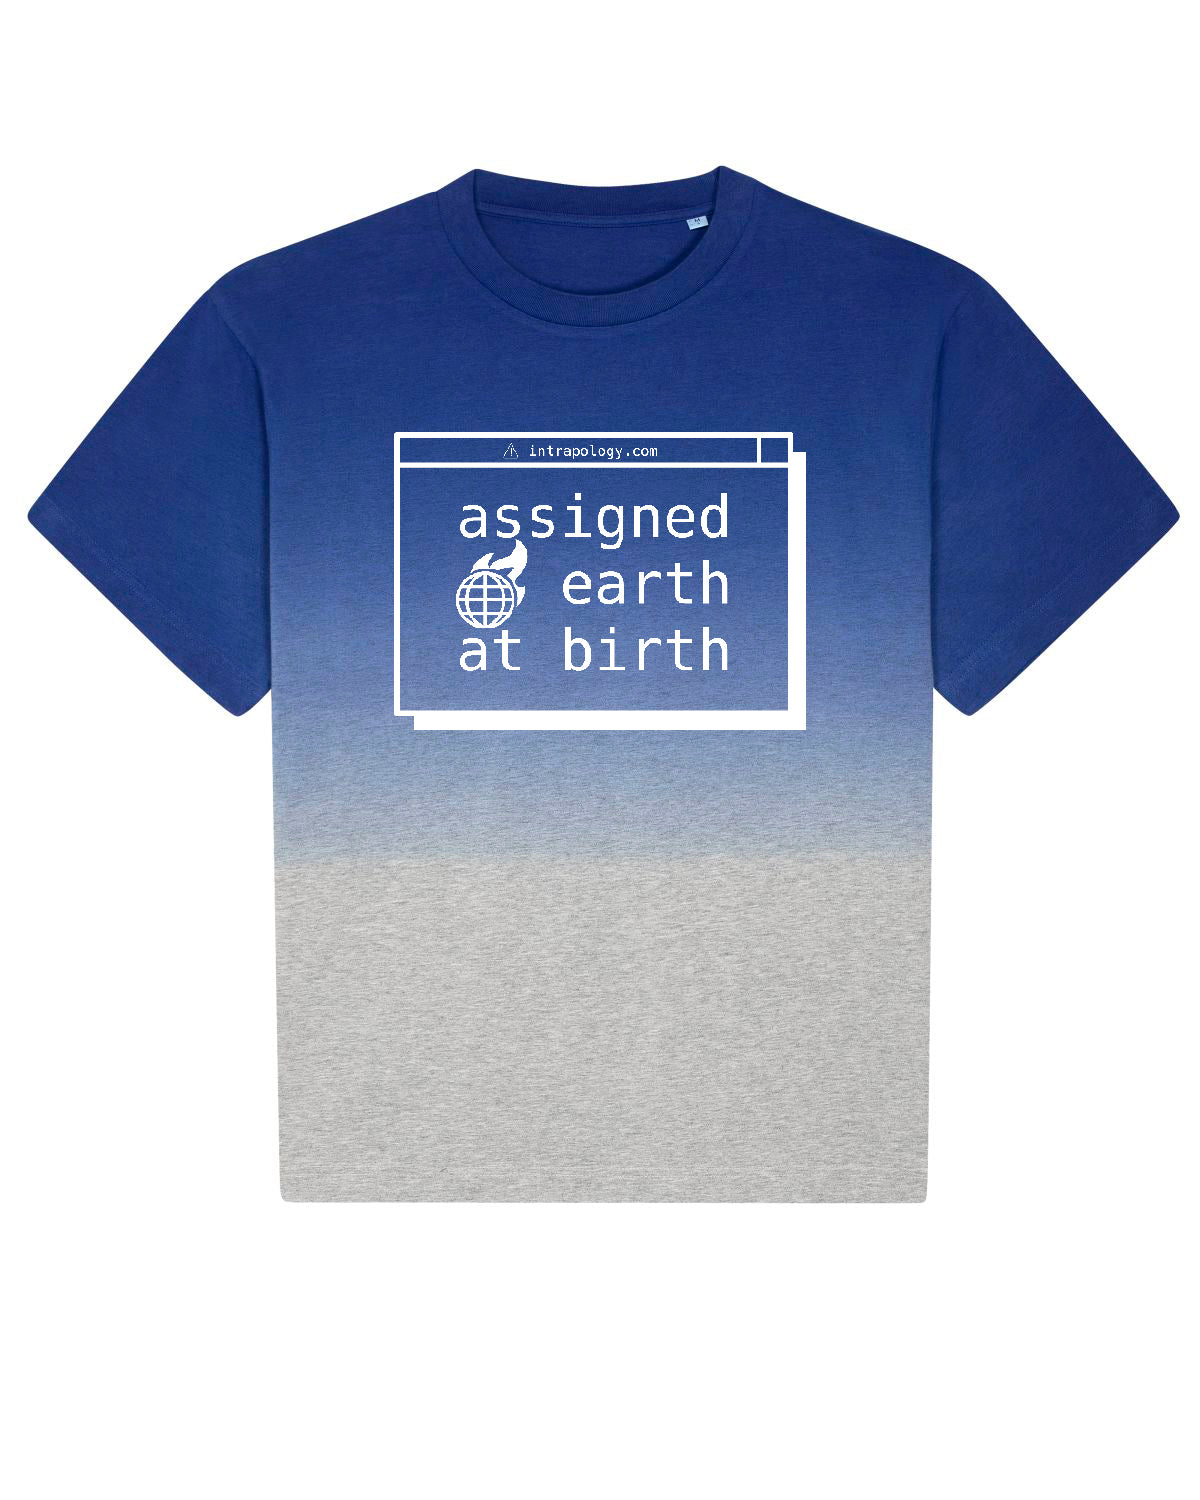 Assigned Earth at Birth | unisex tops (shirts and hoodies)